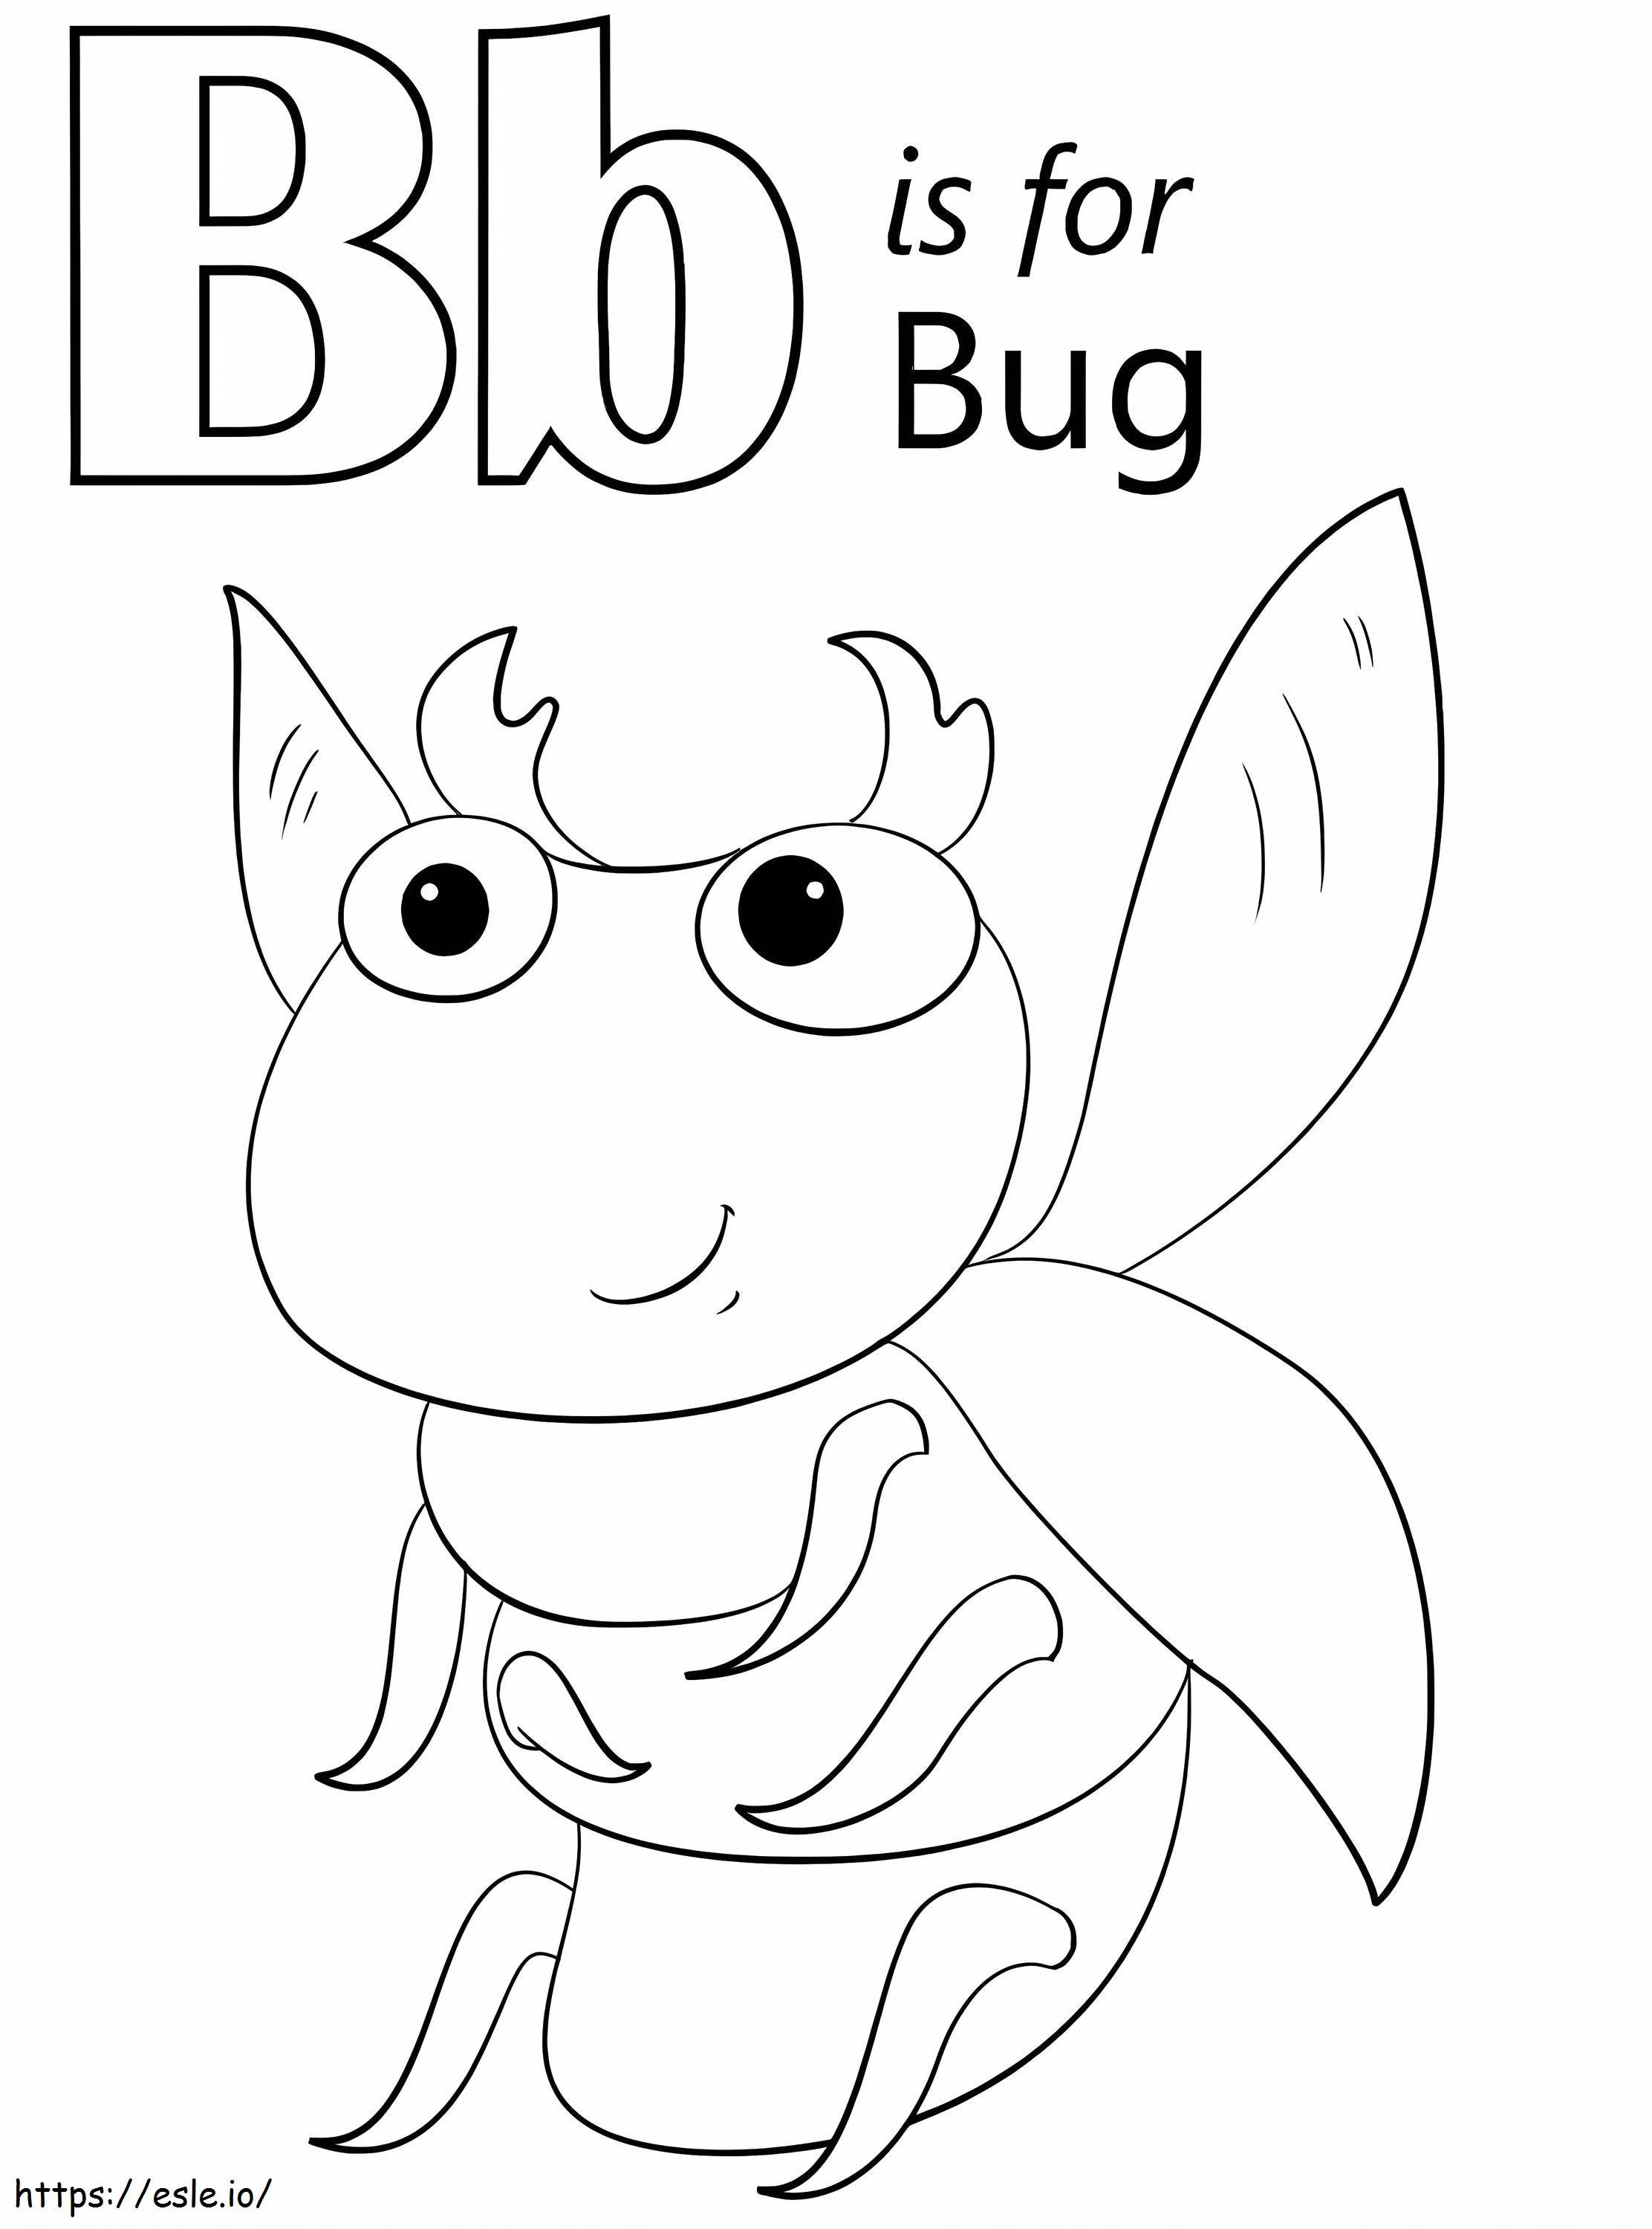 Error Letter B coloring page